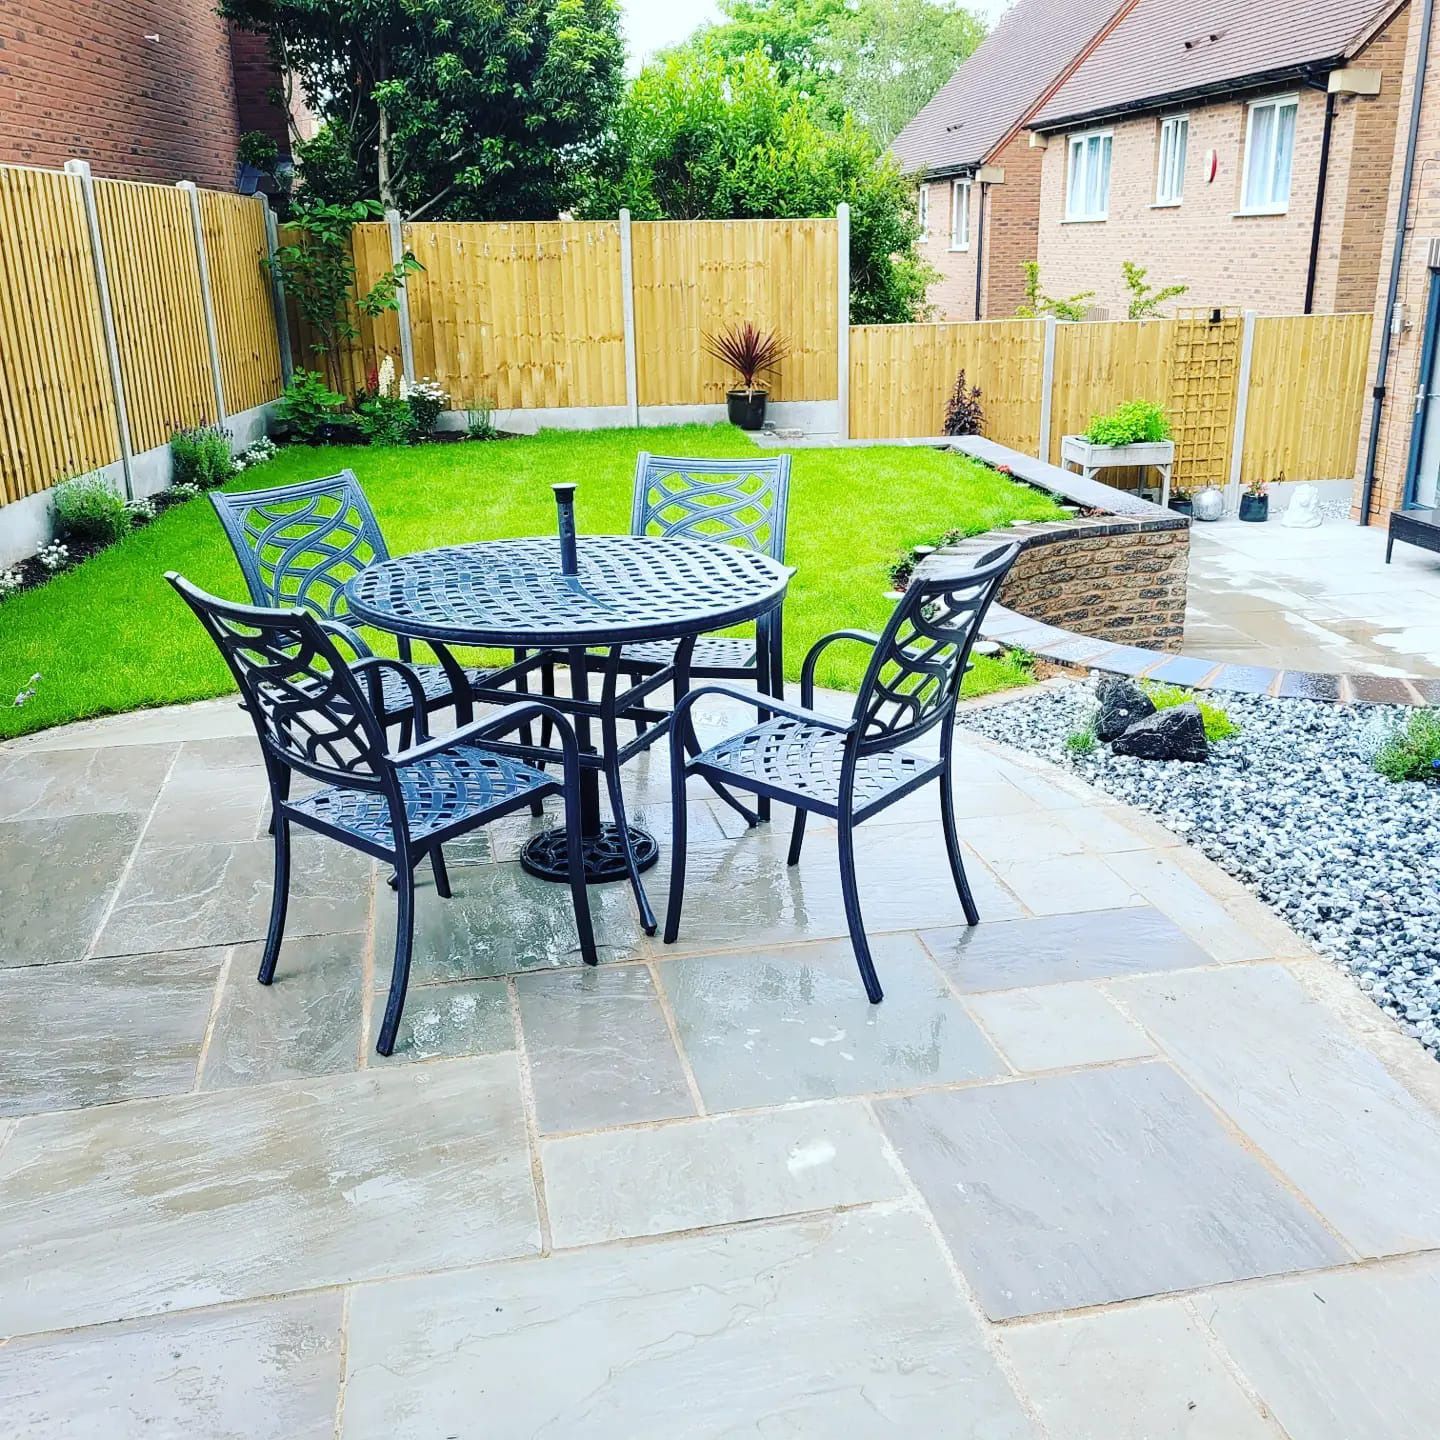 DNA Landscapes Long Itchington landscaping project